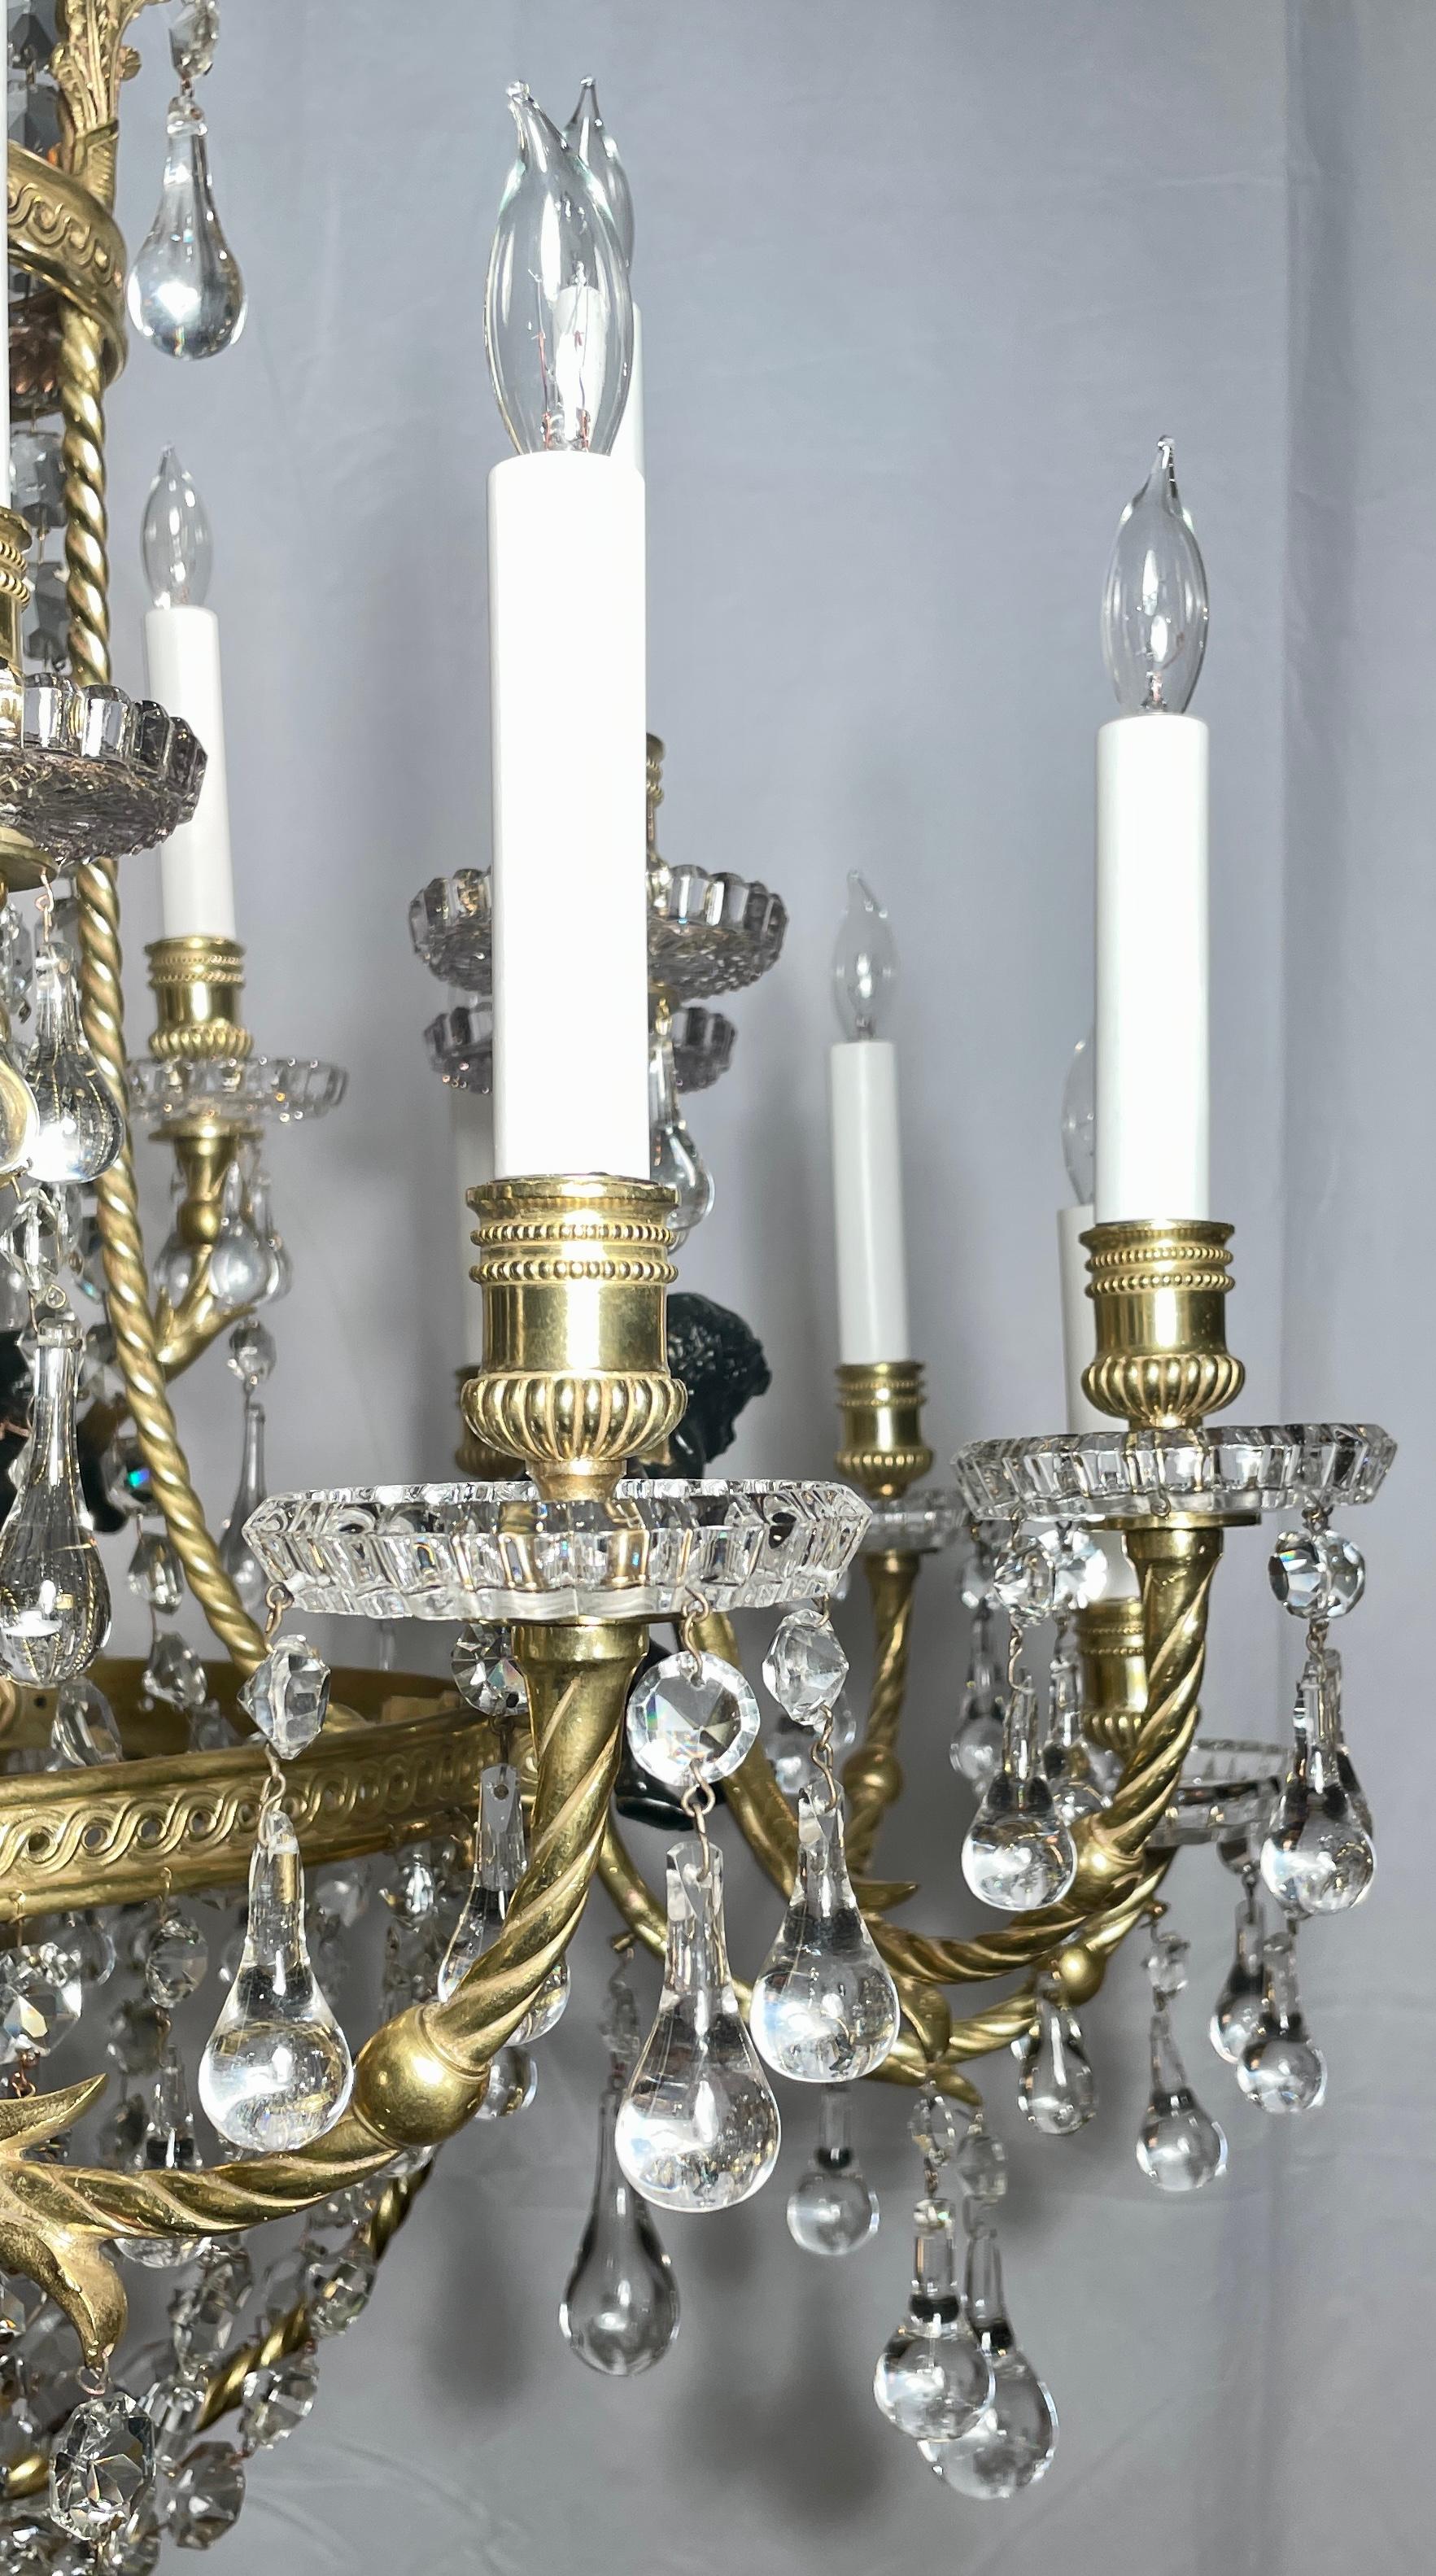 Antique French Baccarat Crystal & Bronze D'ore Chandelier, circa 1890 For Sale 1